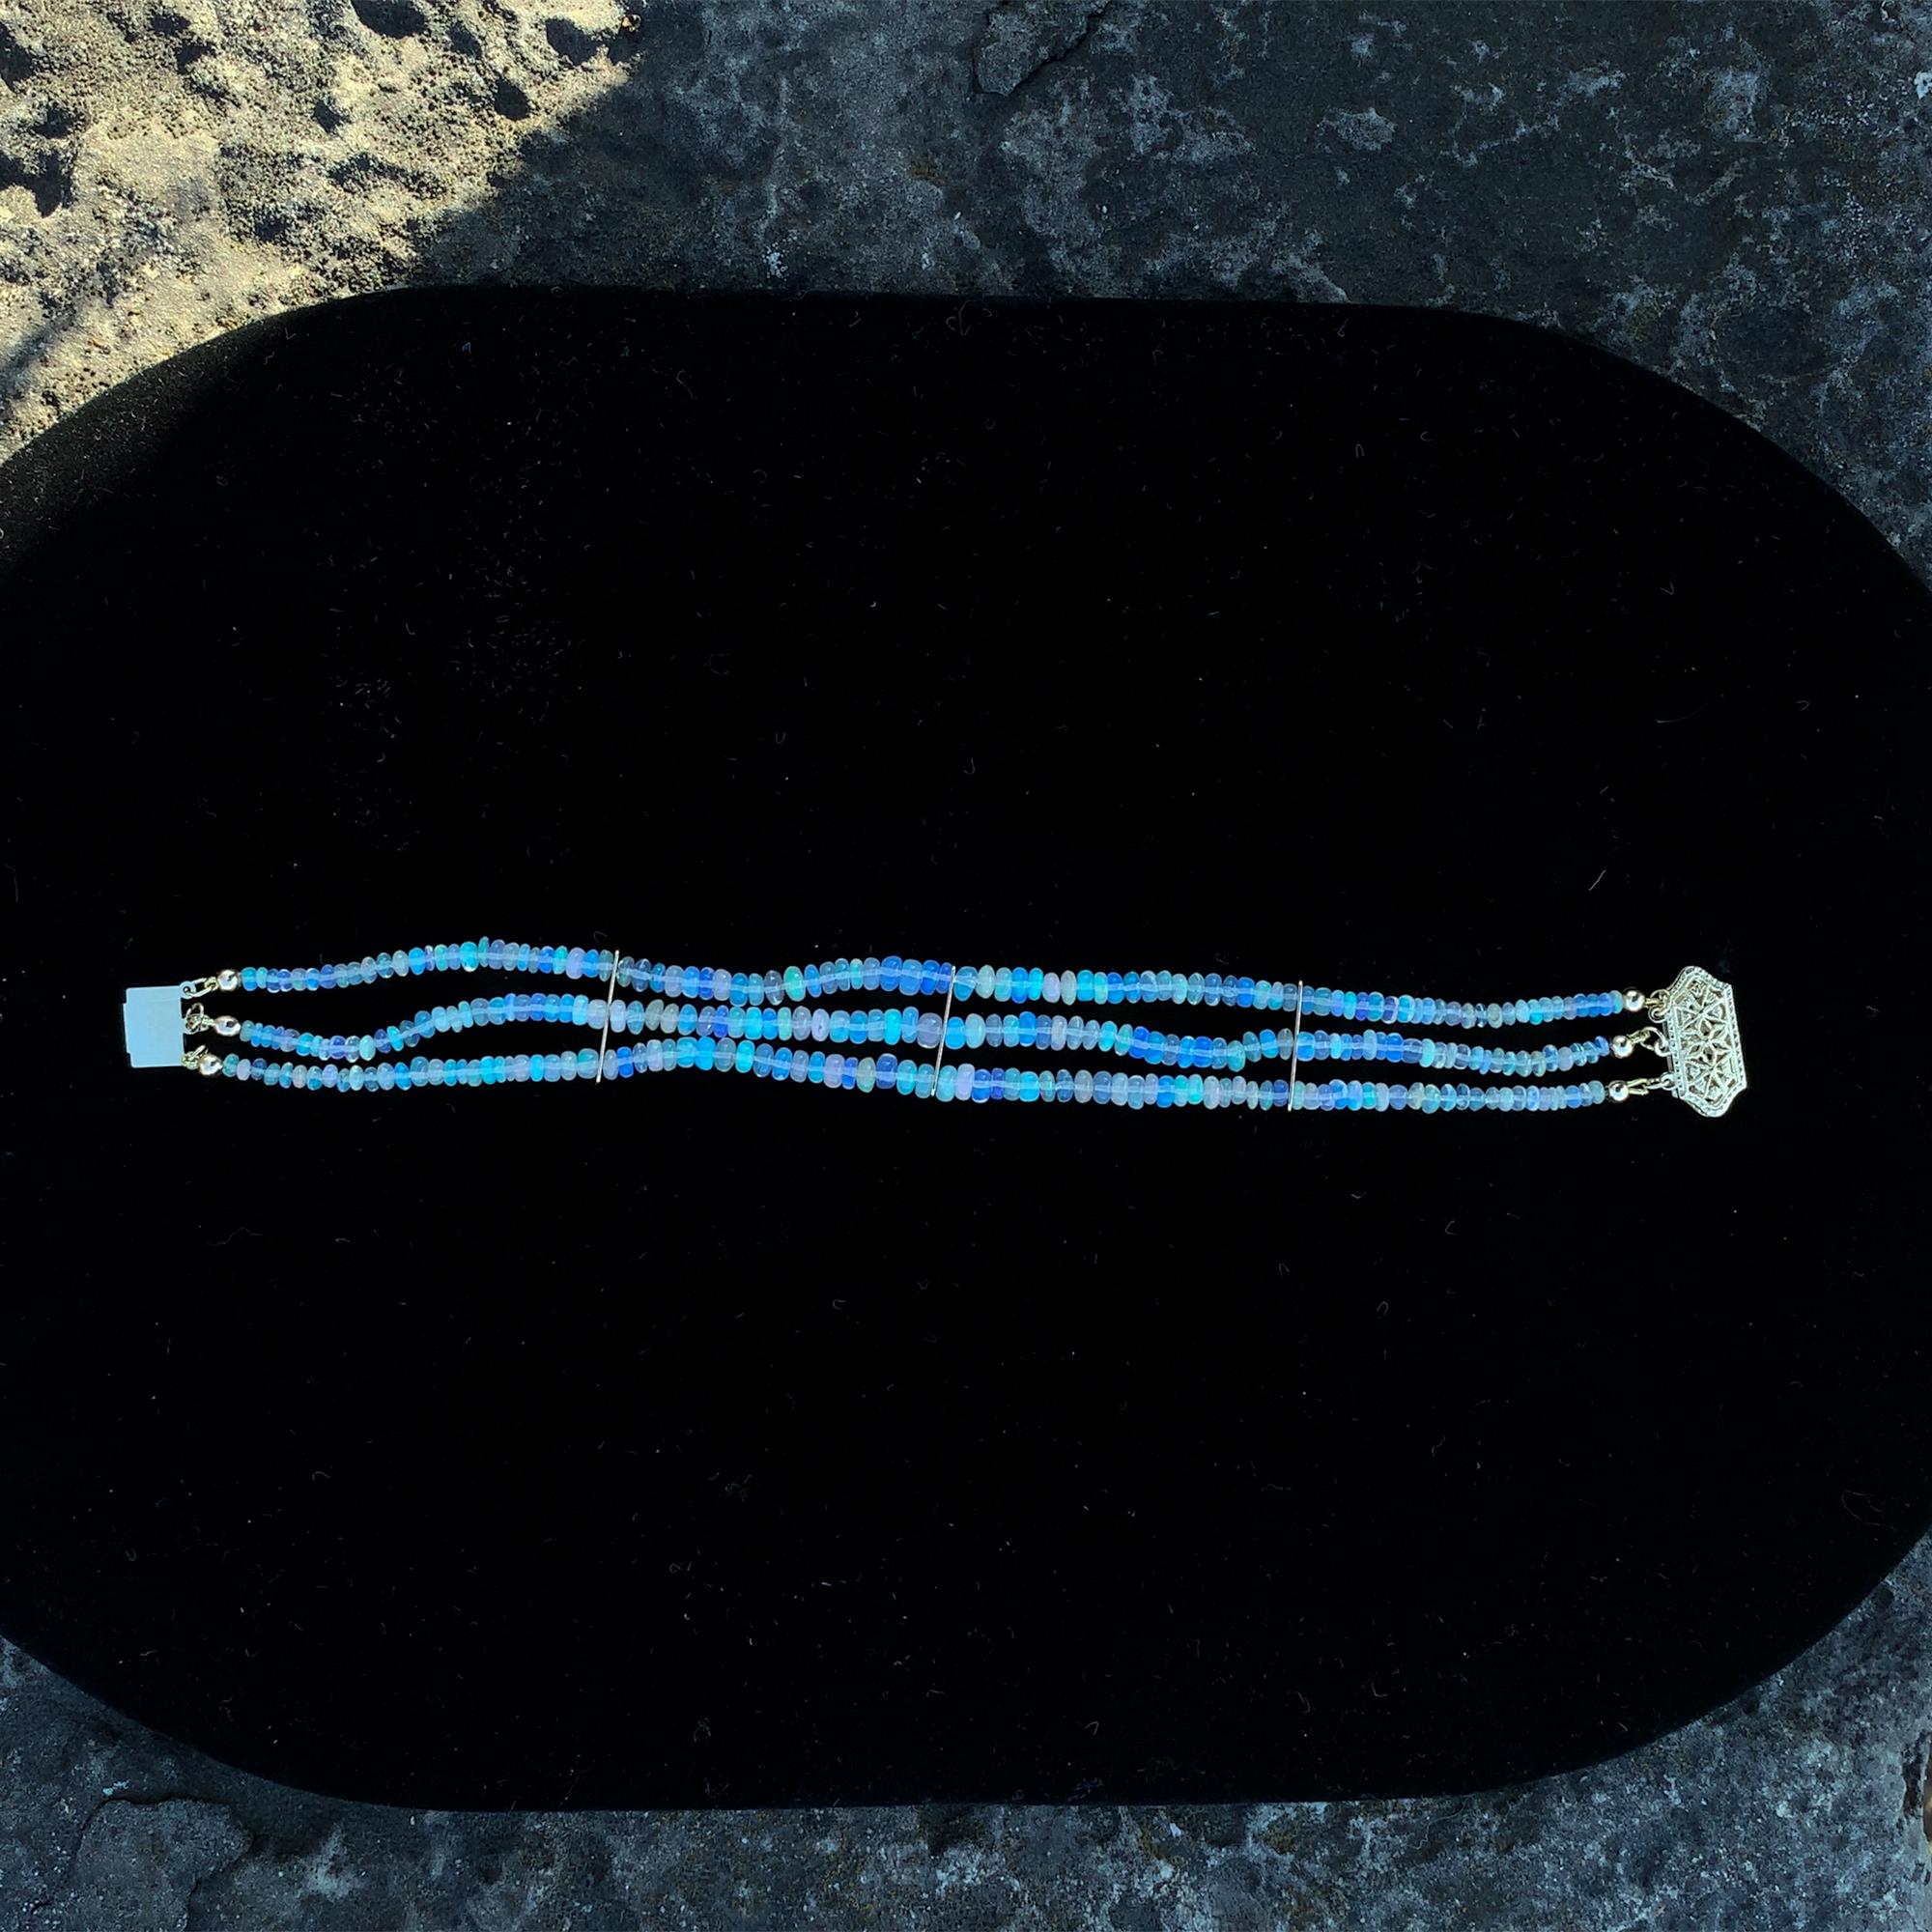 A three strand bracelet of natural earth mined Welo opal beads weighing about 25 carats. The bracelet measures 7